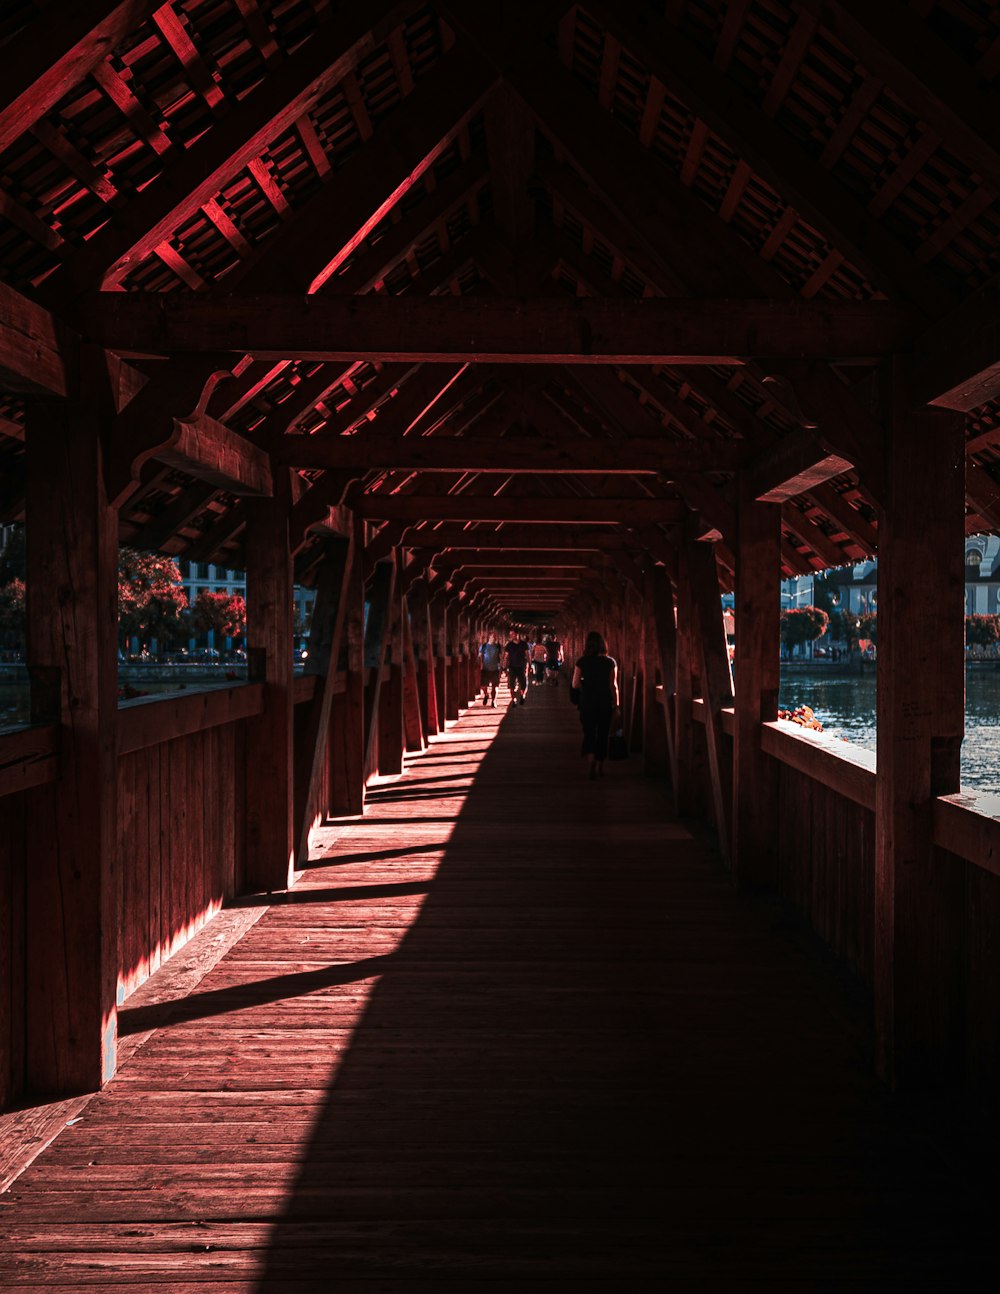 a long wooden walkway with a person walking down it